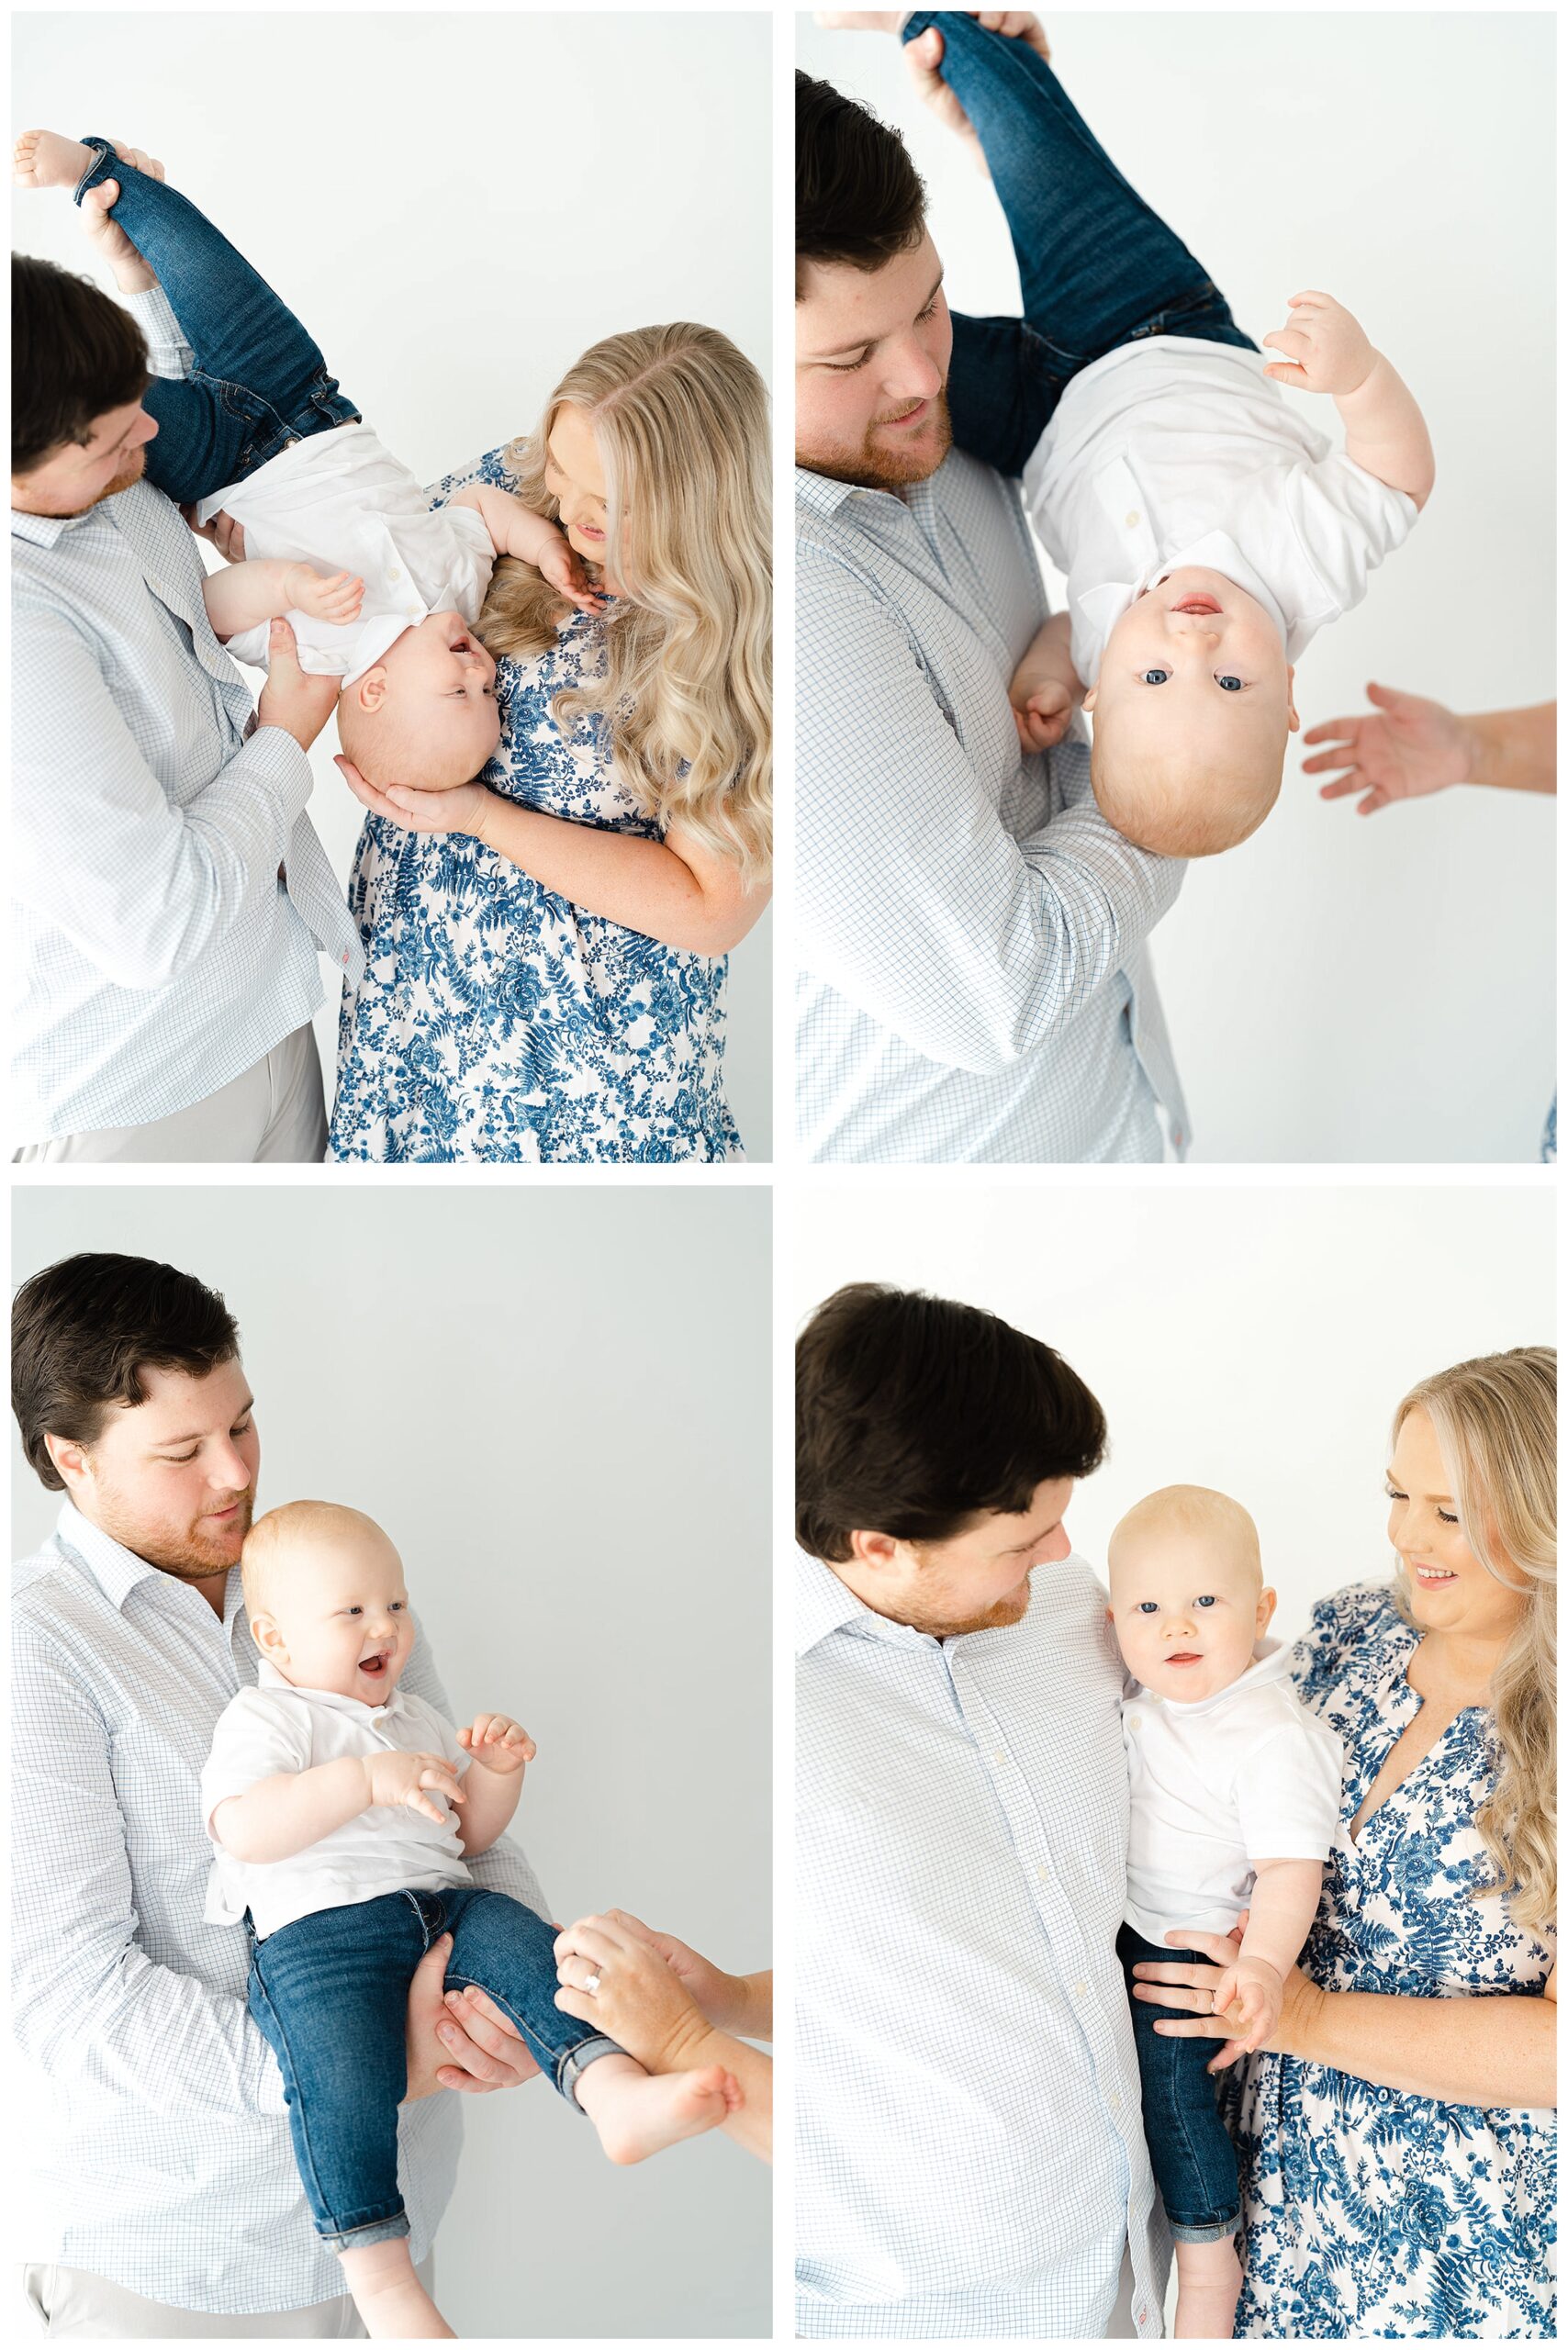 Family of 3 playing at baby milestone session in Marietta, GA studio by Lindsey Powell Photography